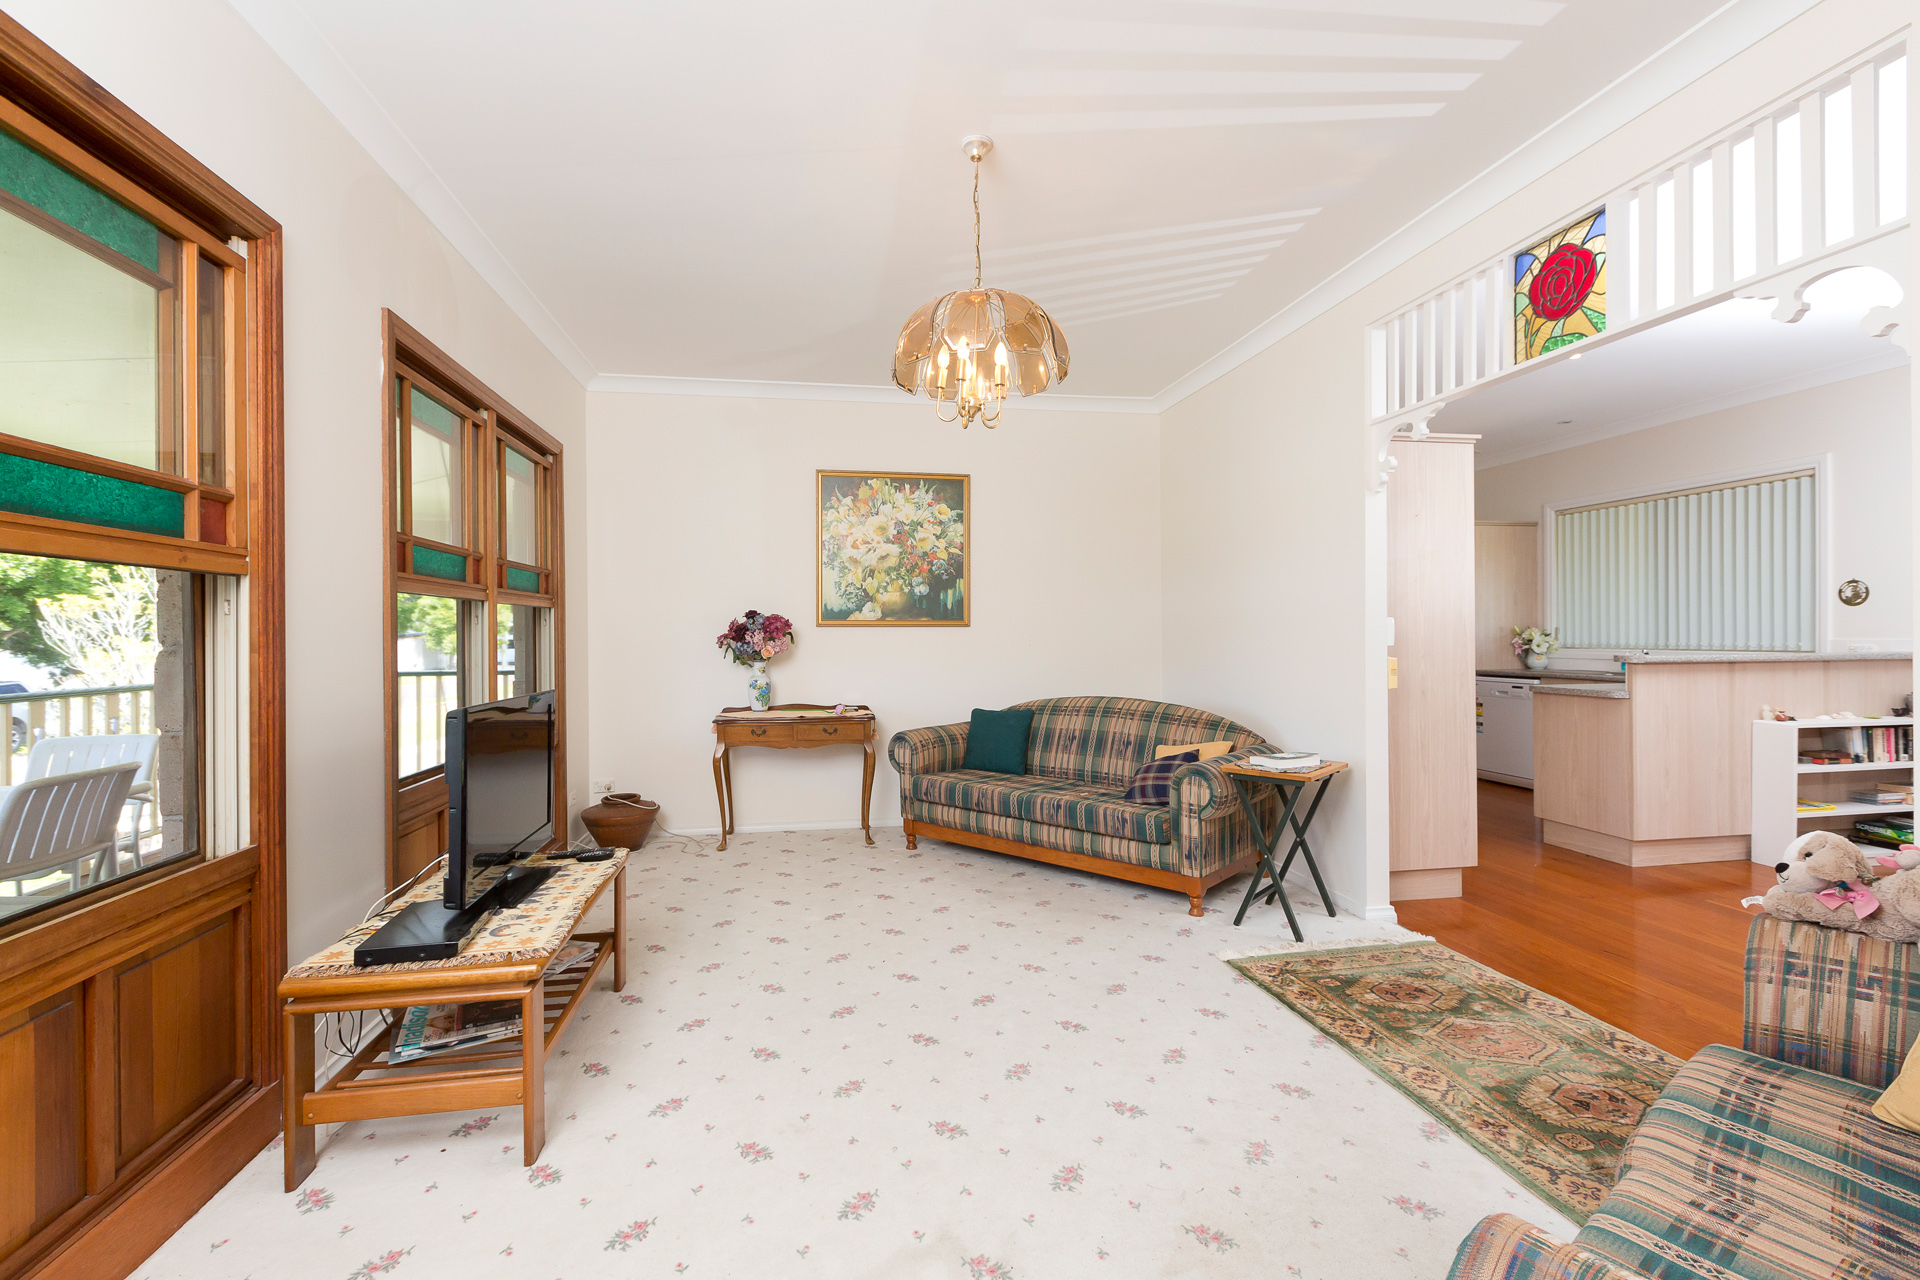 Cranford Waterfront Cottage - Coogee Beach Accommodation 0